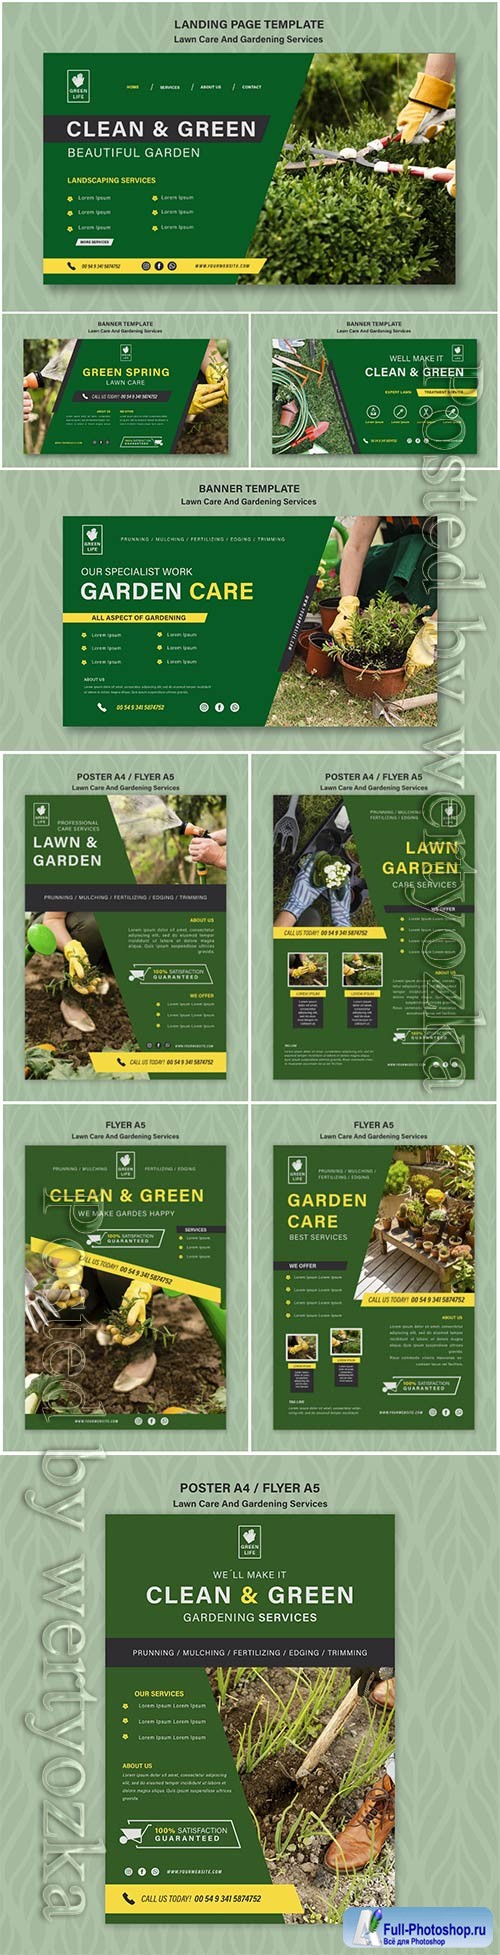 Lawn care concept banner template